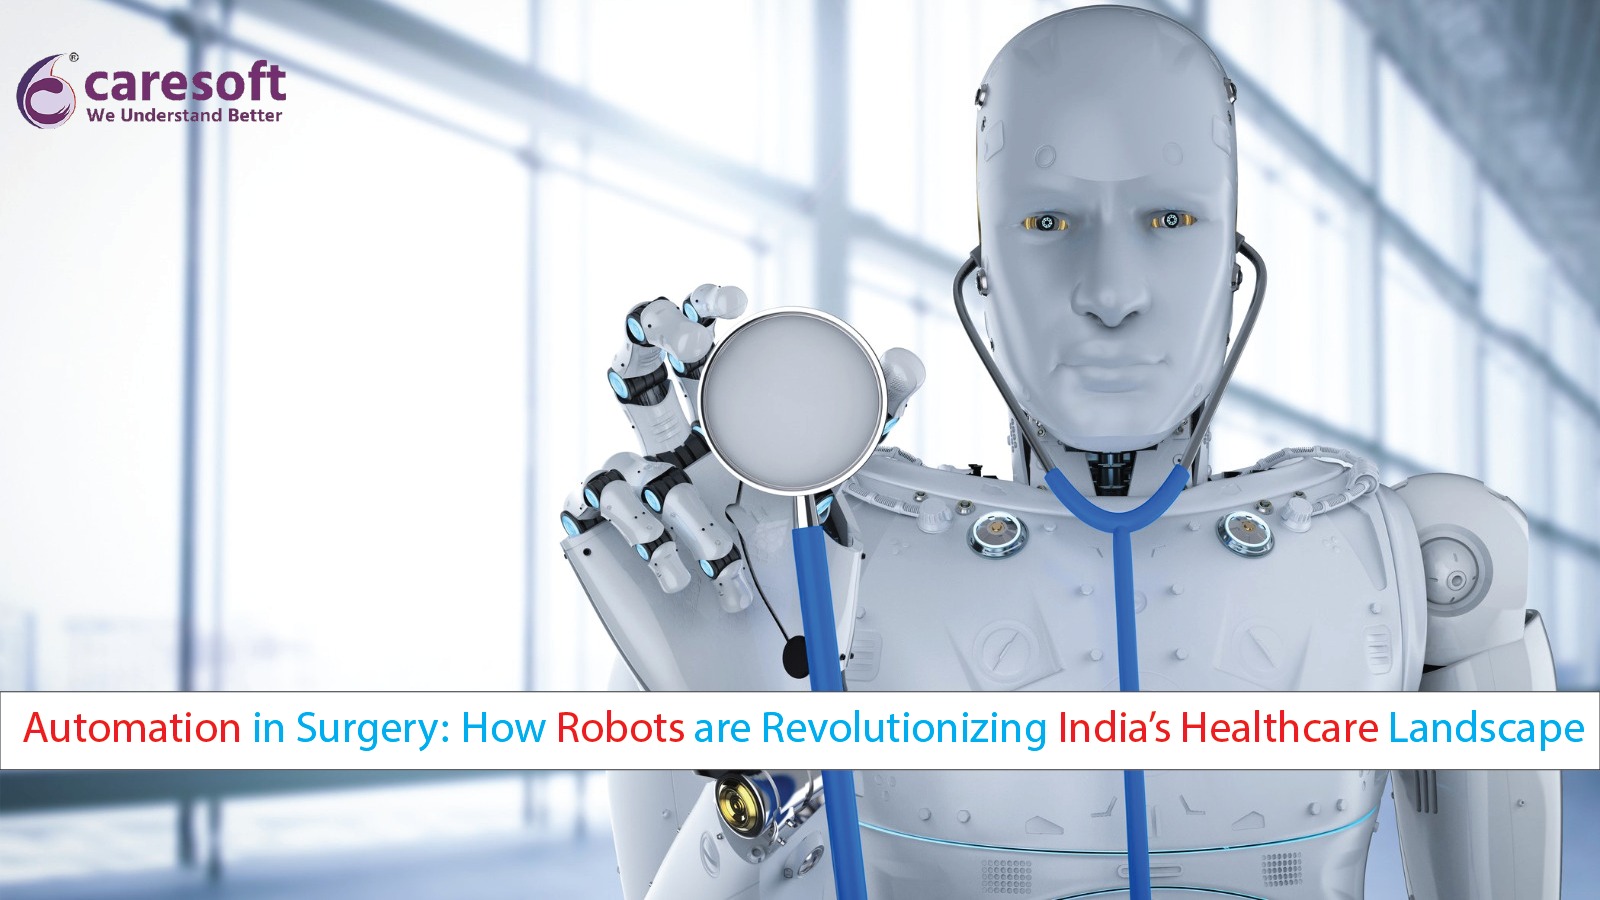 Automation in Surgery: How Robots are Revolutionizing India’s Healthcare Landscape